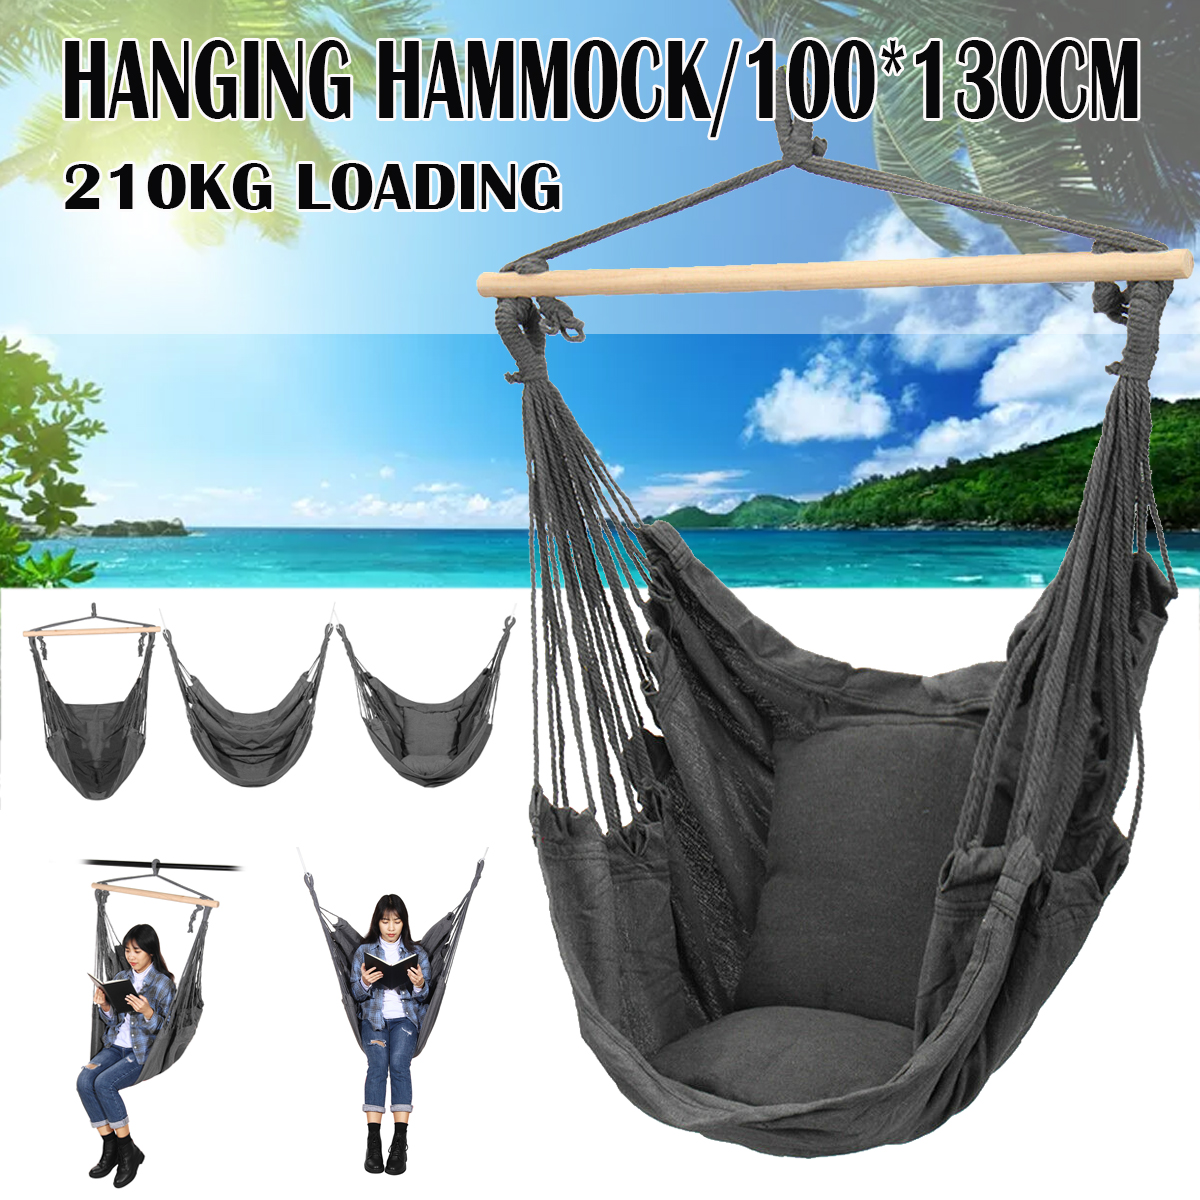 100x130cm-Camping-Hammock-Hanging-Bed-Outdoor-Beach-Travel-Swing-Max-Load-150kg-1633994-1